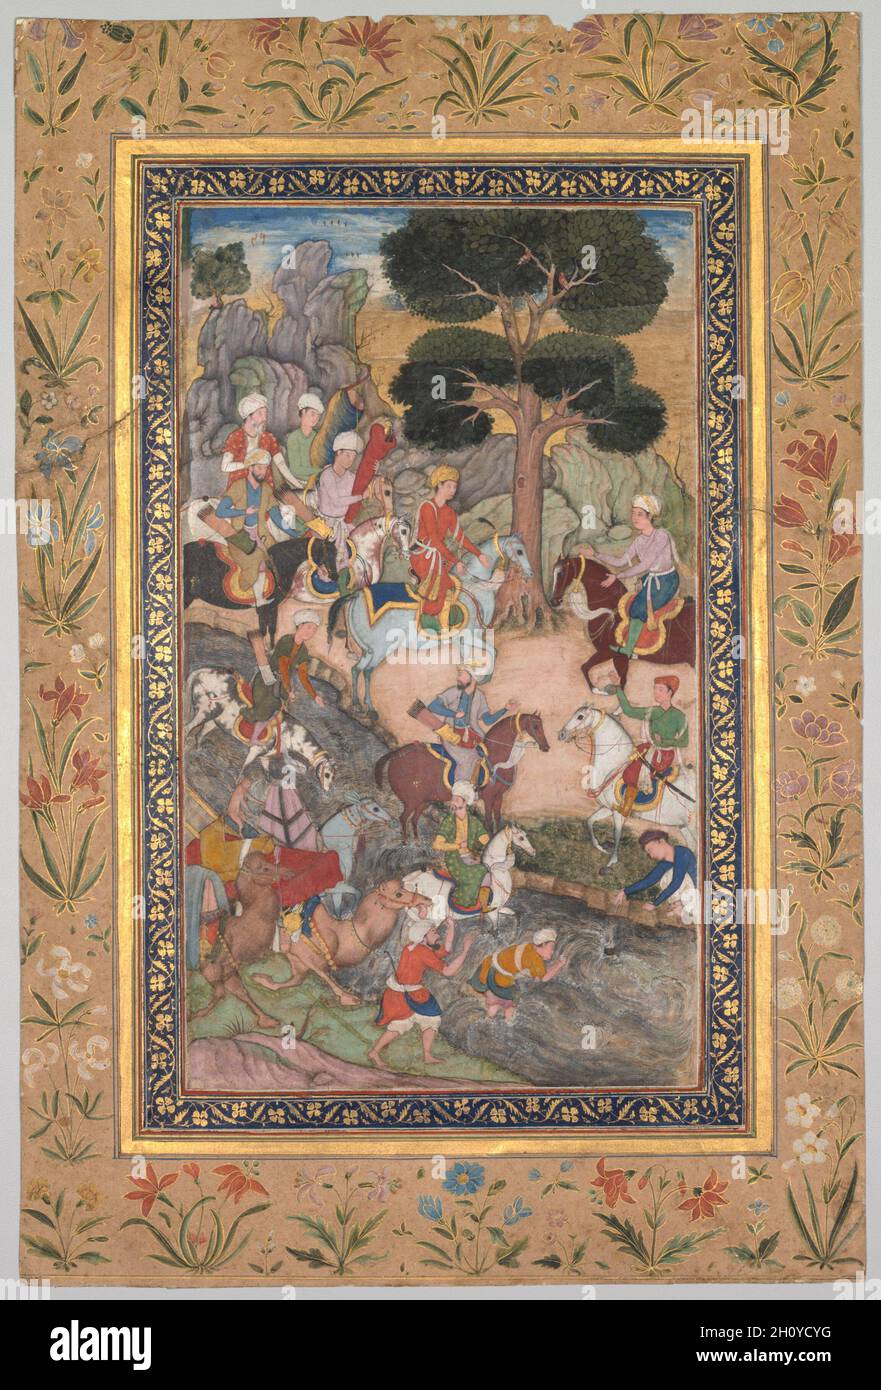 Babur meeting with Sultan Ali Mirza at the Kohik River, from a Babur-nama (Memoirs of Babur), c. 1590. India, Mughal school, 16th century. Opaque watercolor and gold on paper; image: 28 x 16.5 cm (11 x 6 1/2 in.); overall: 41 x 27.1 cm (16 1/8 x 10 11/16 in.).  Thirty years before he captured Delhi and founded the Mughal Empire, Babur began his expansionist activities at the age of 13, as depicted in this painting of an encounter that took place in 1496. Having traveled long distances across harsh dry terrain, Babur confronted one of his rivals who, like him, was angling to march on and conque Stock Photo